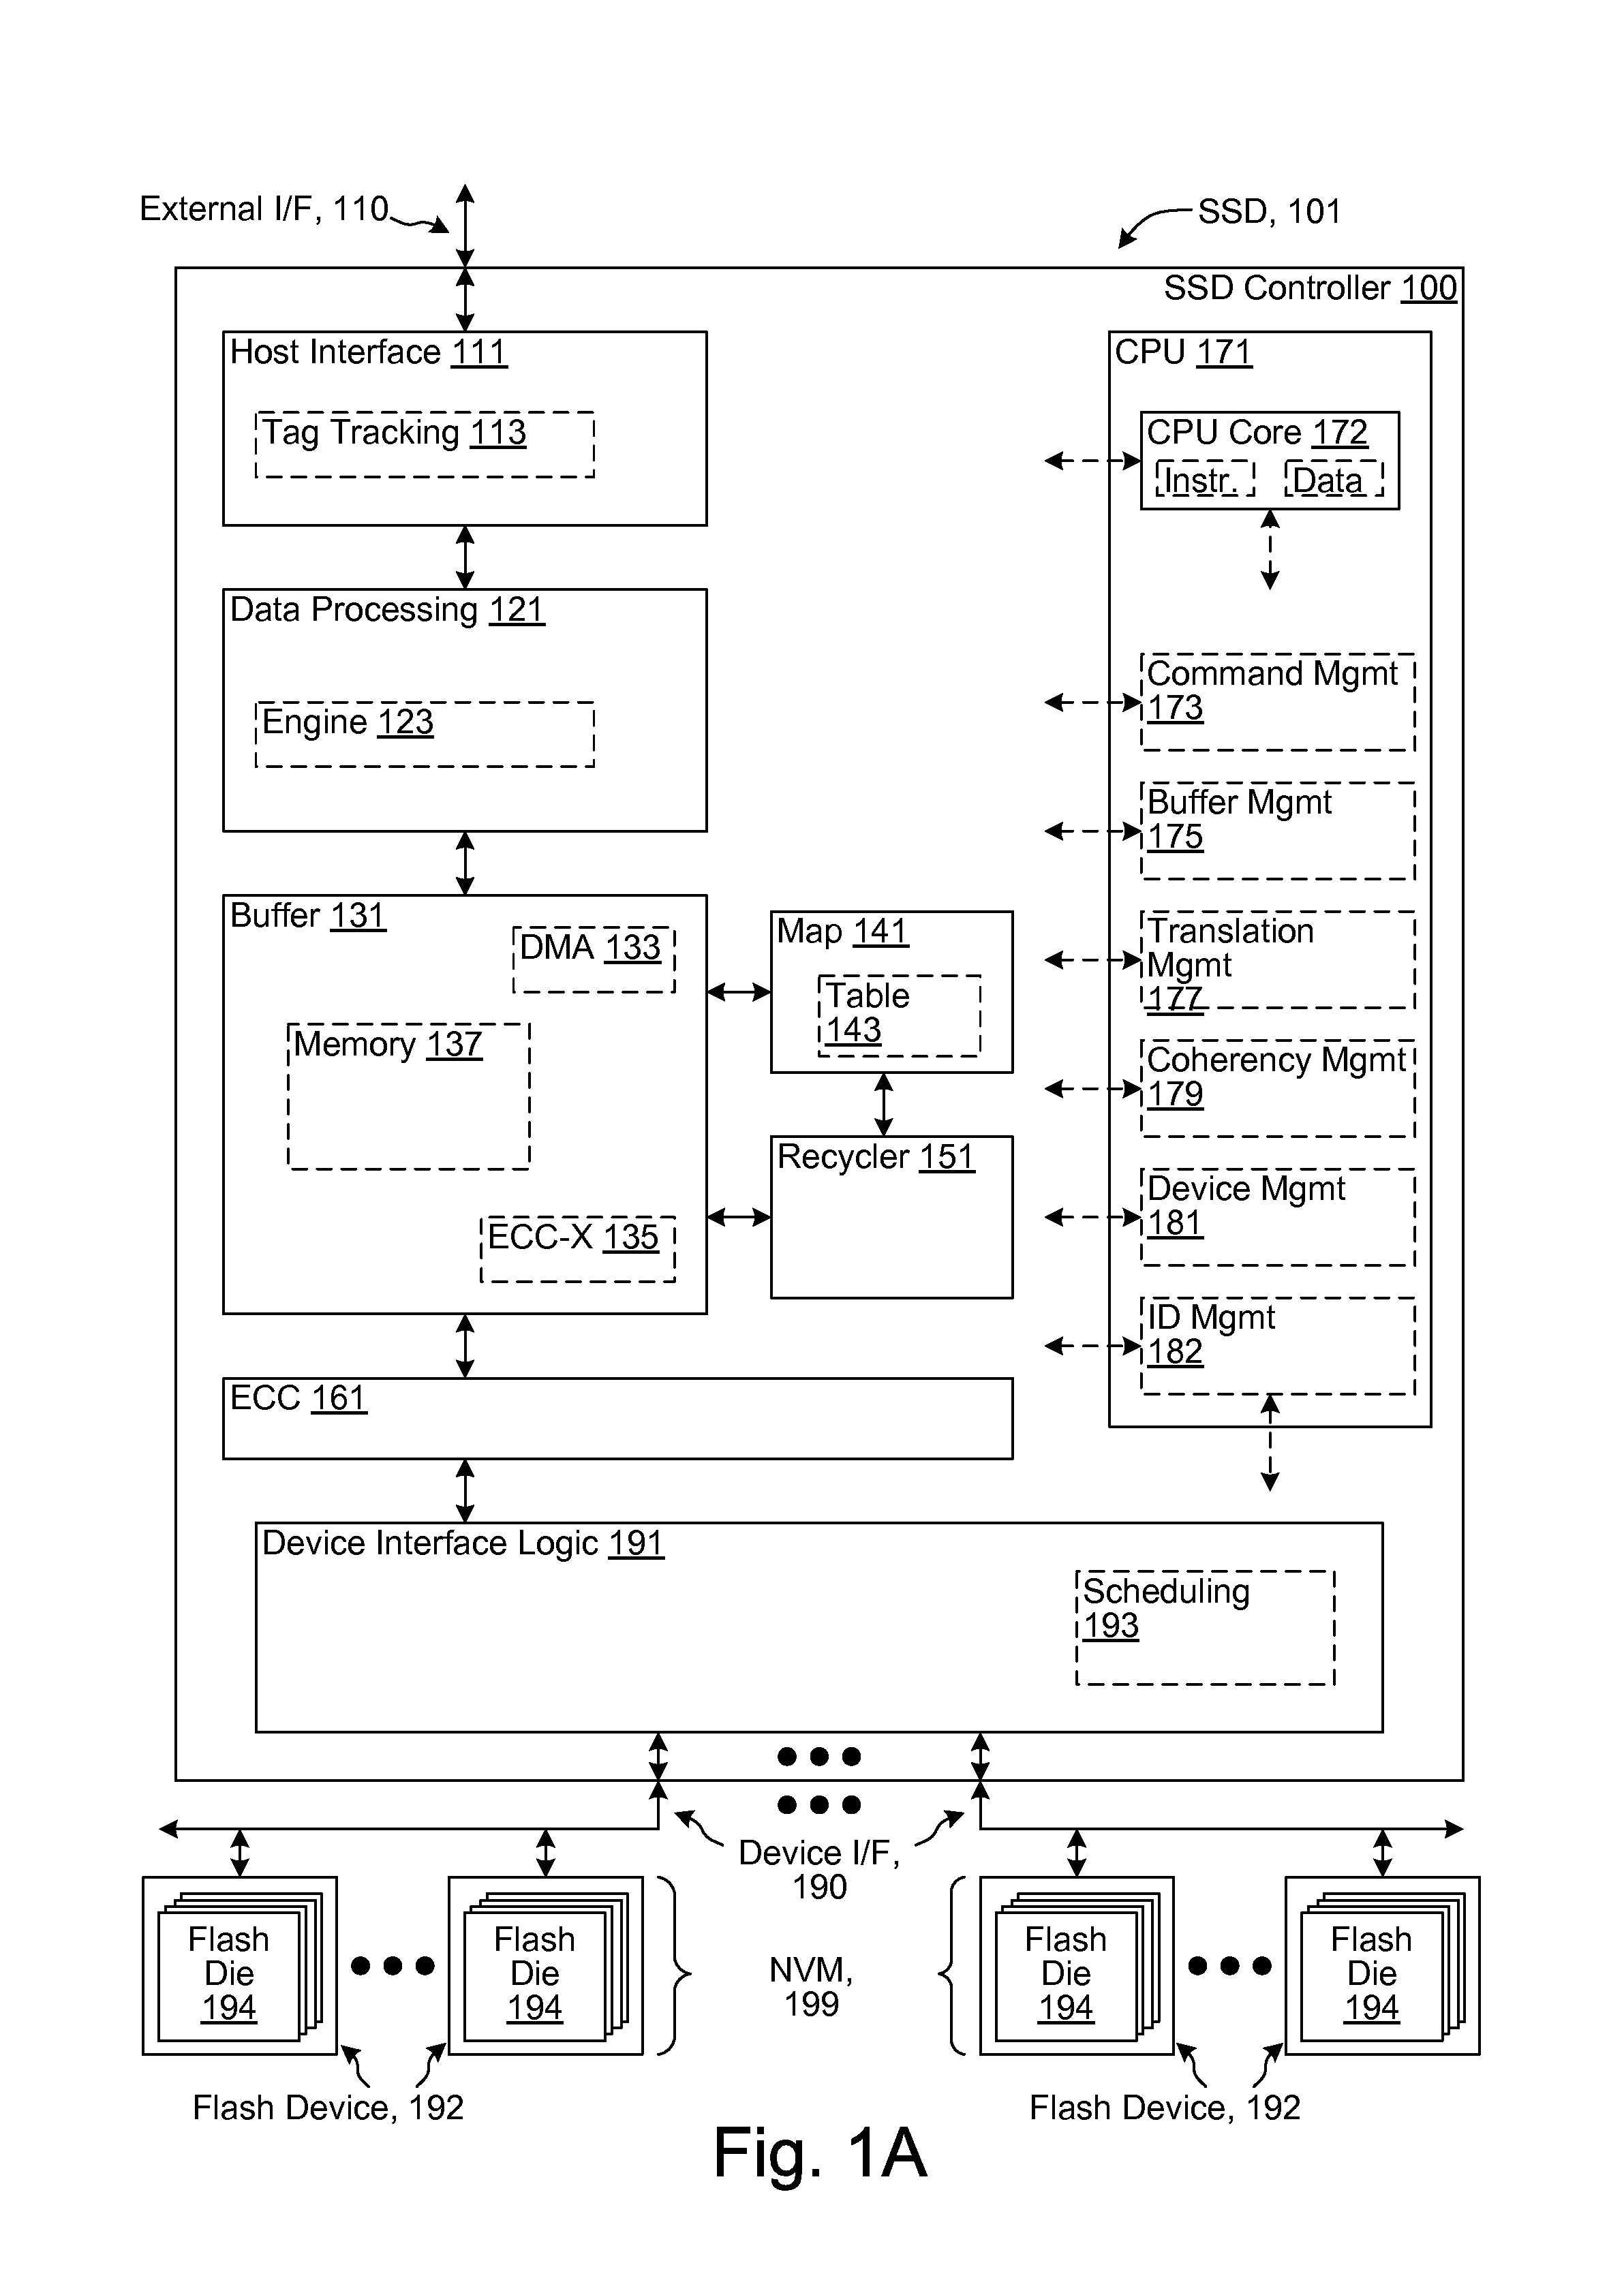 Zero-one balance management in a solid-state disk controller